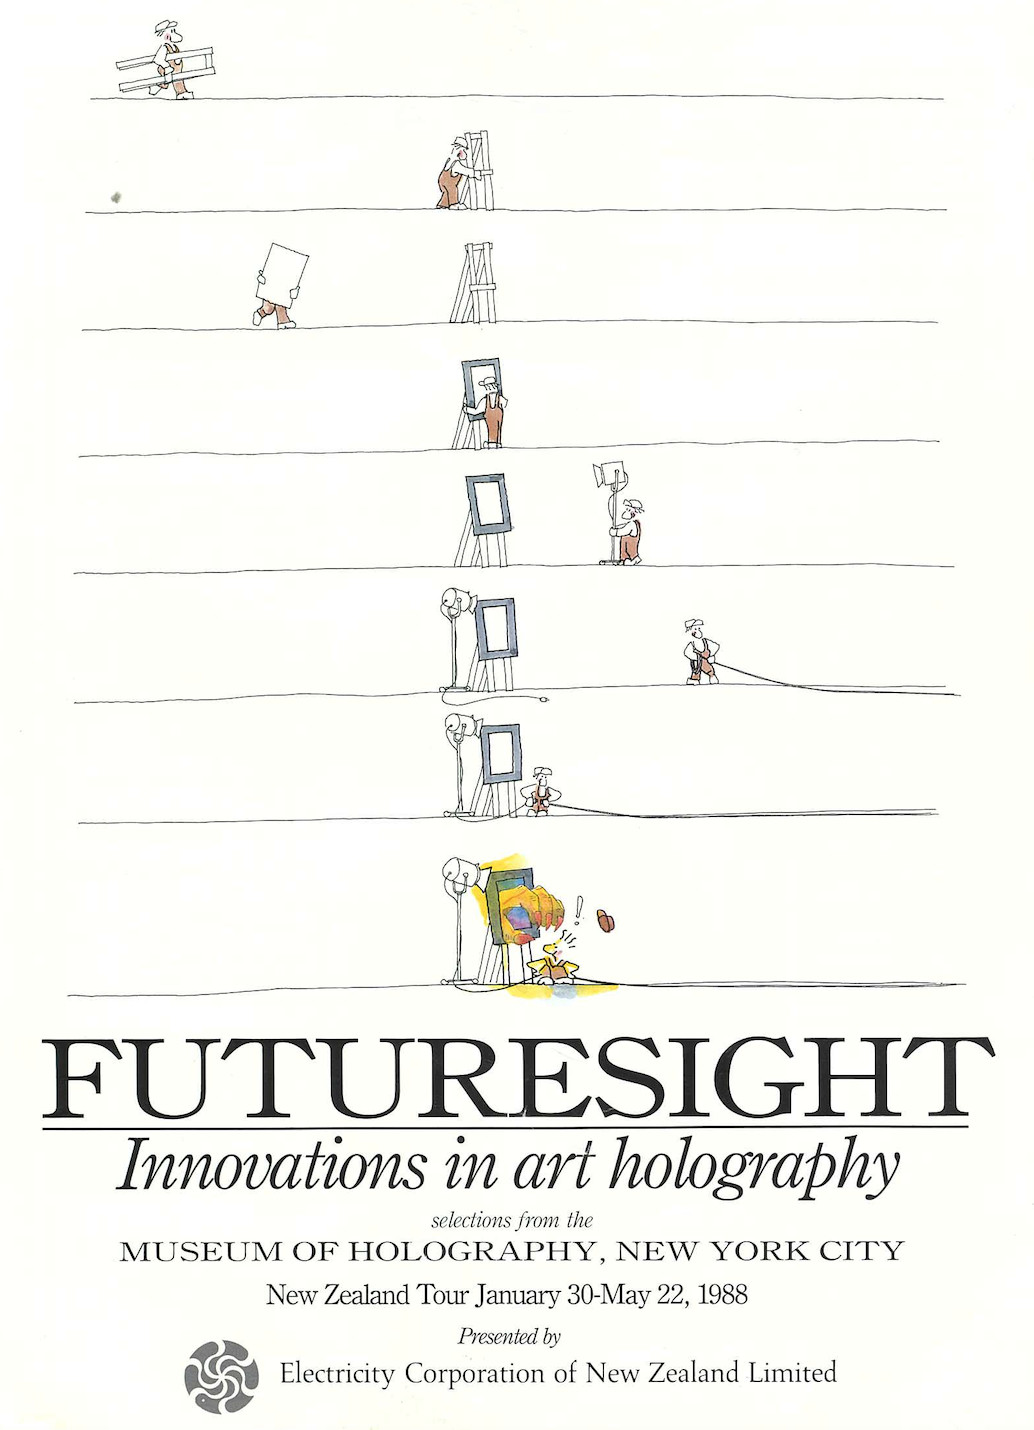 <p>Futuresight: Innovations in Art Holography</p>